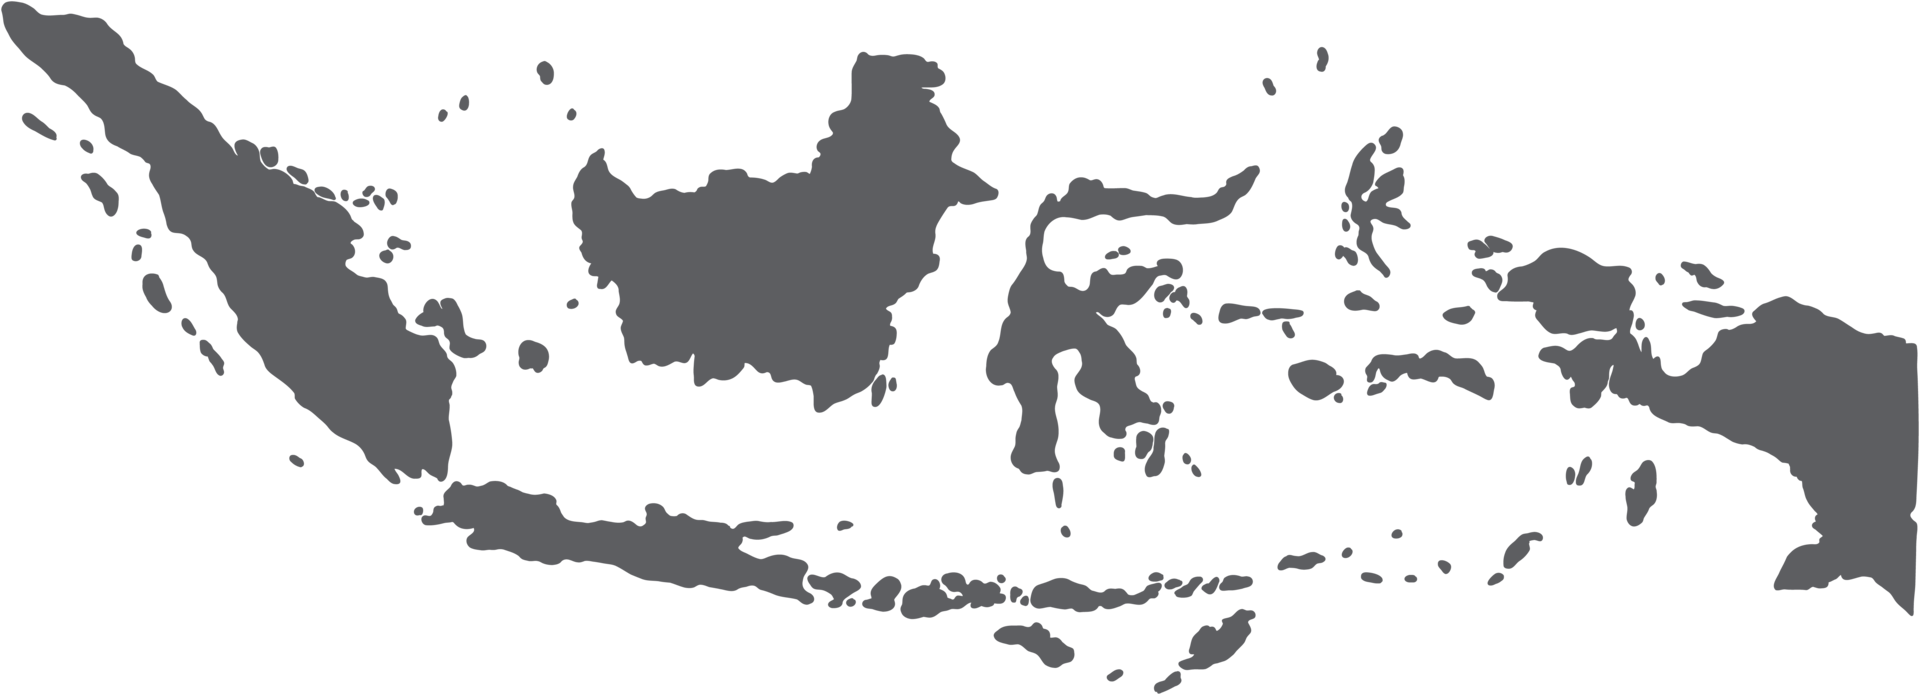 doodle freehand drawing of indonesia map. png